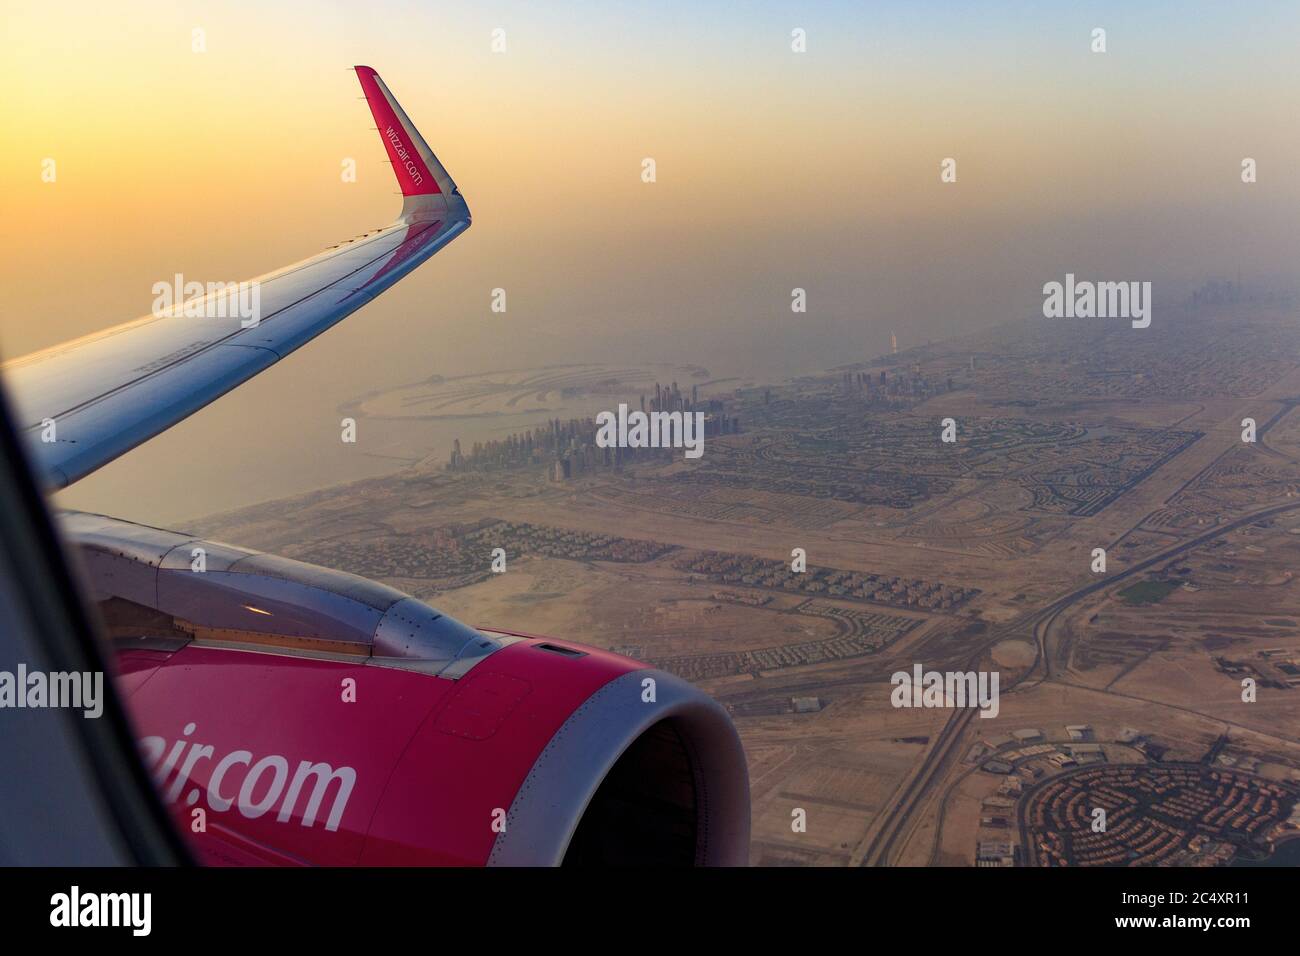 DUBAI, UAE - CIRCA 2020: View of Dubai skyline from an airplane during a colorful sunset. View of Persian Golf and Dubai skyscrapers. Stock Photo